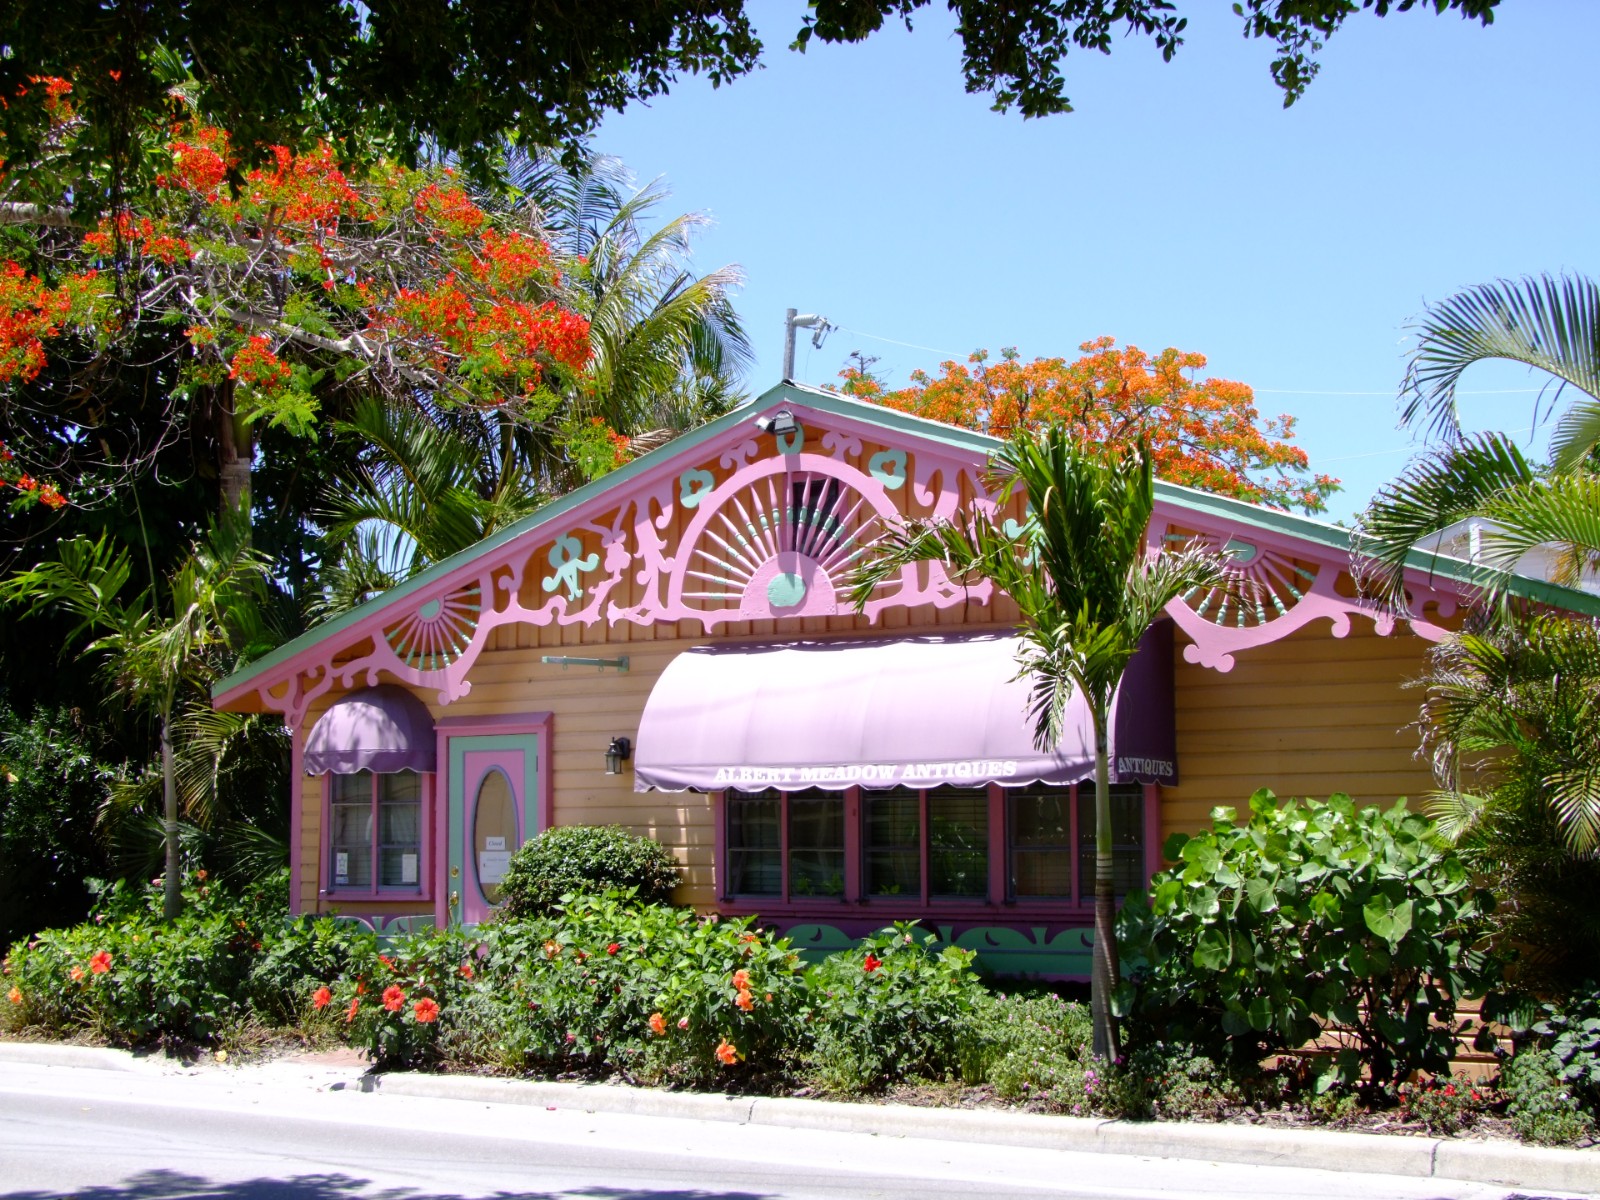 Pretty in pink, Gifts | Shop | Pink | Orange | Yellow | Blue | Sky | Island | Florida | Travel | Flowers | Tree